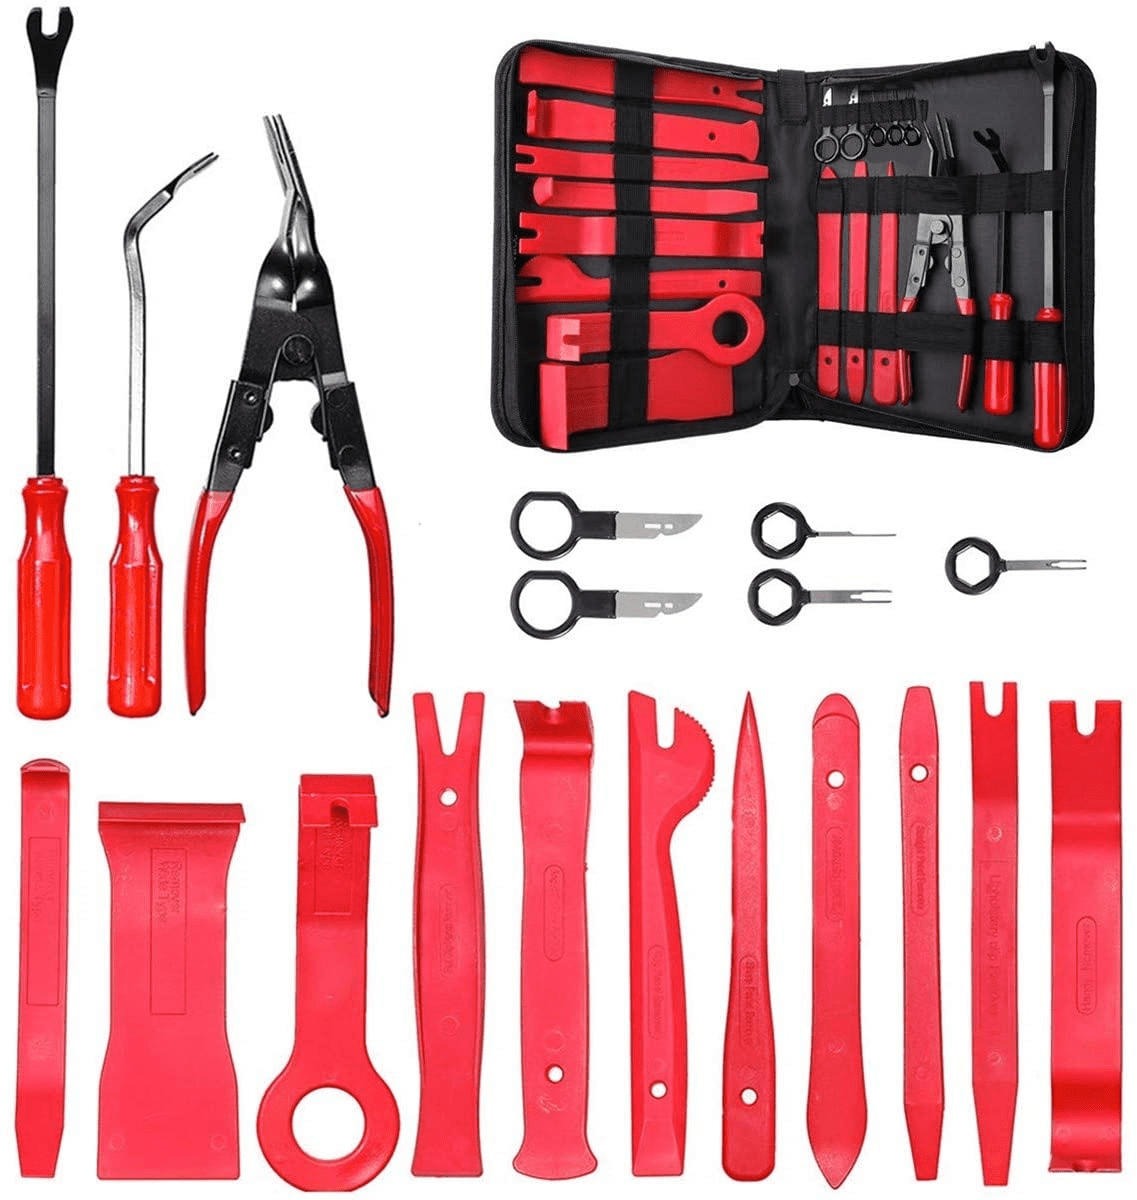 Non Marring Wedge 2 Wrench & Carrying Case Bag Auto Tool Set for Cars Trucks Air Wedge Bag with Pump Protoiya 14 Pcs Car Tool Kits Essential Automotive Car Tool Kit with Long Reach Grabber 